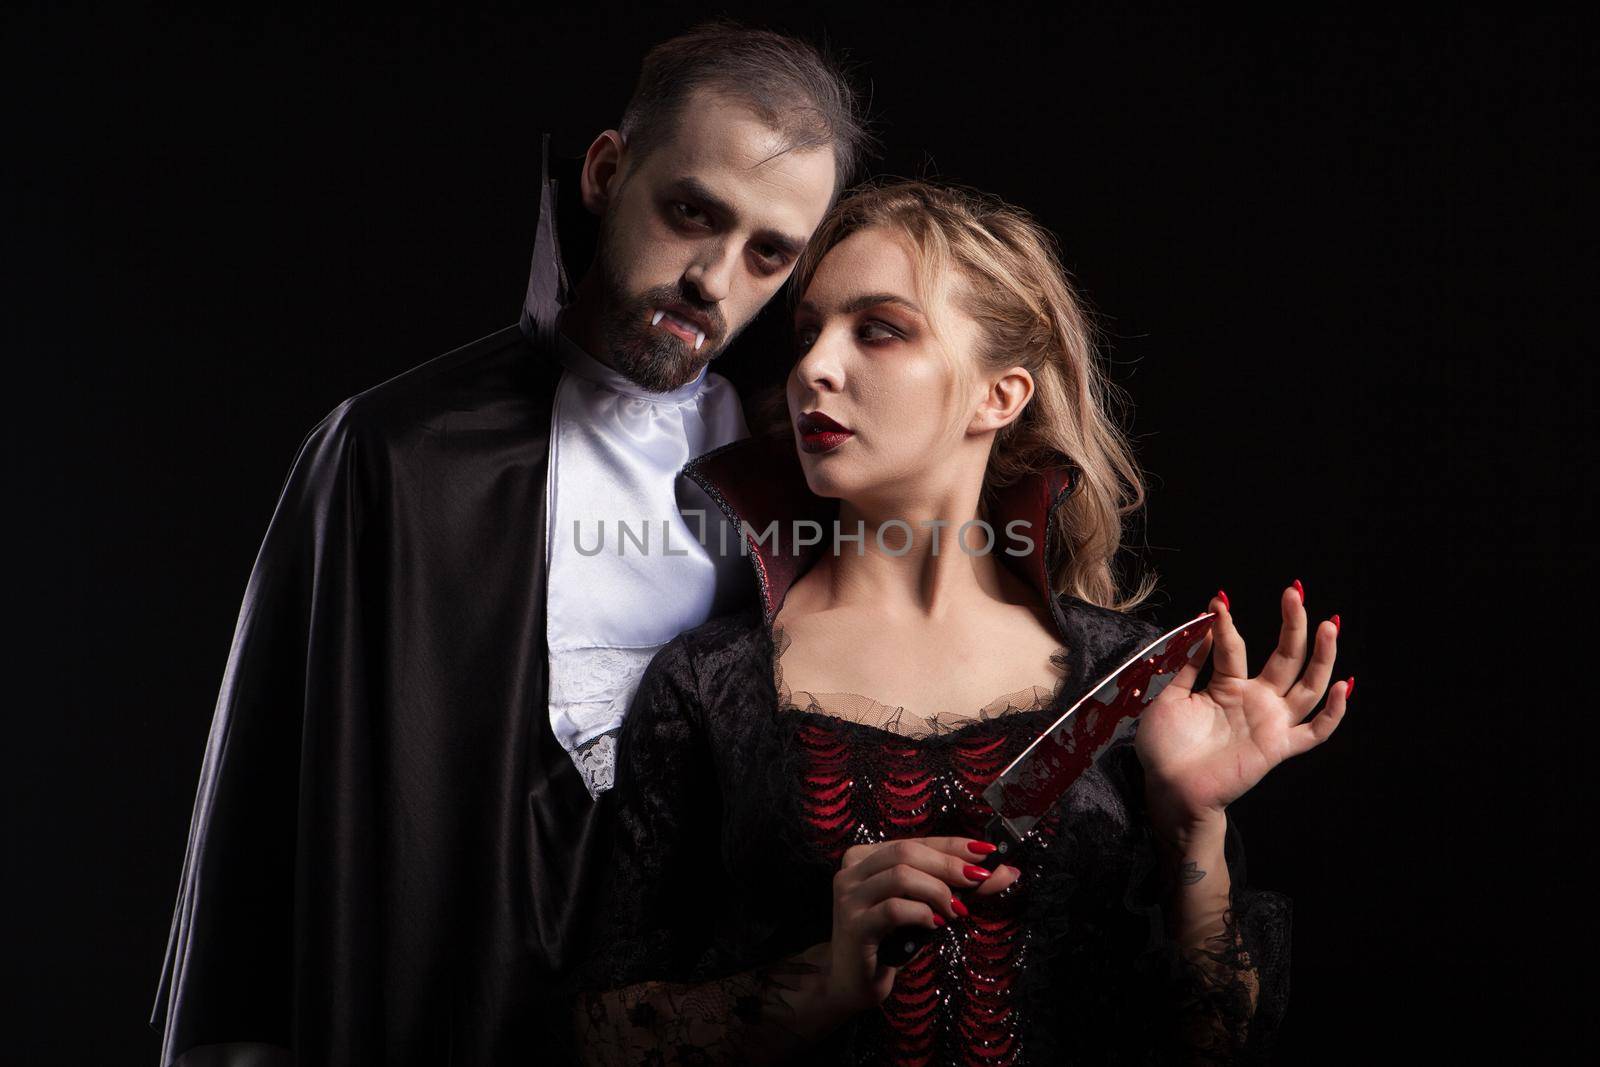 Beautiful young vampire woman with a blade covered in blood looking at her man dressed up like Dracula for halloween by DCStudio